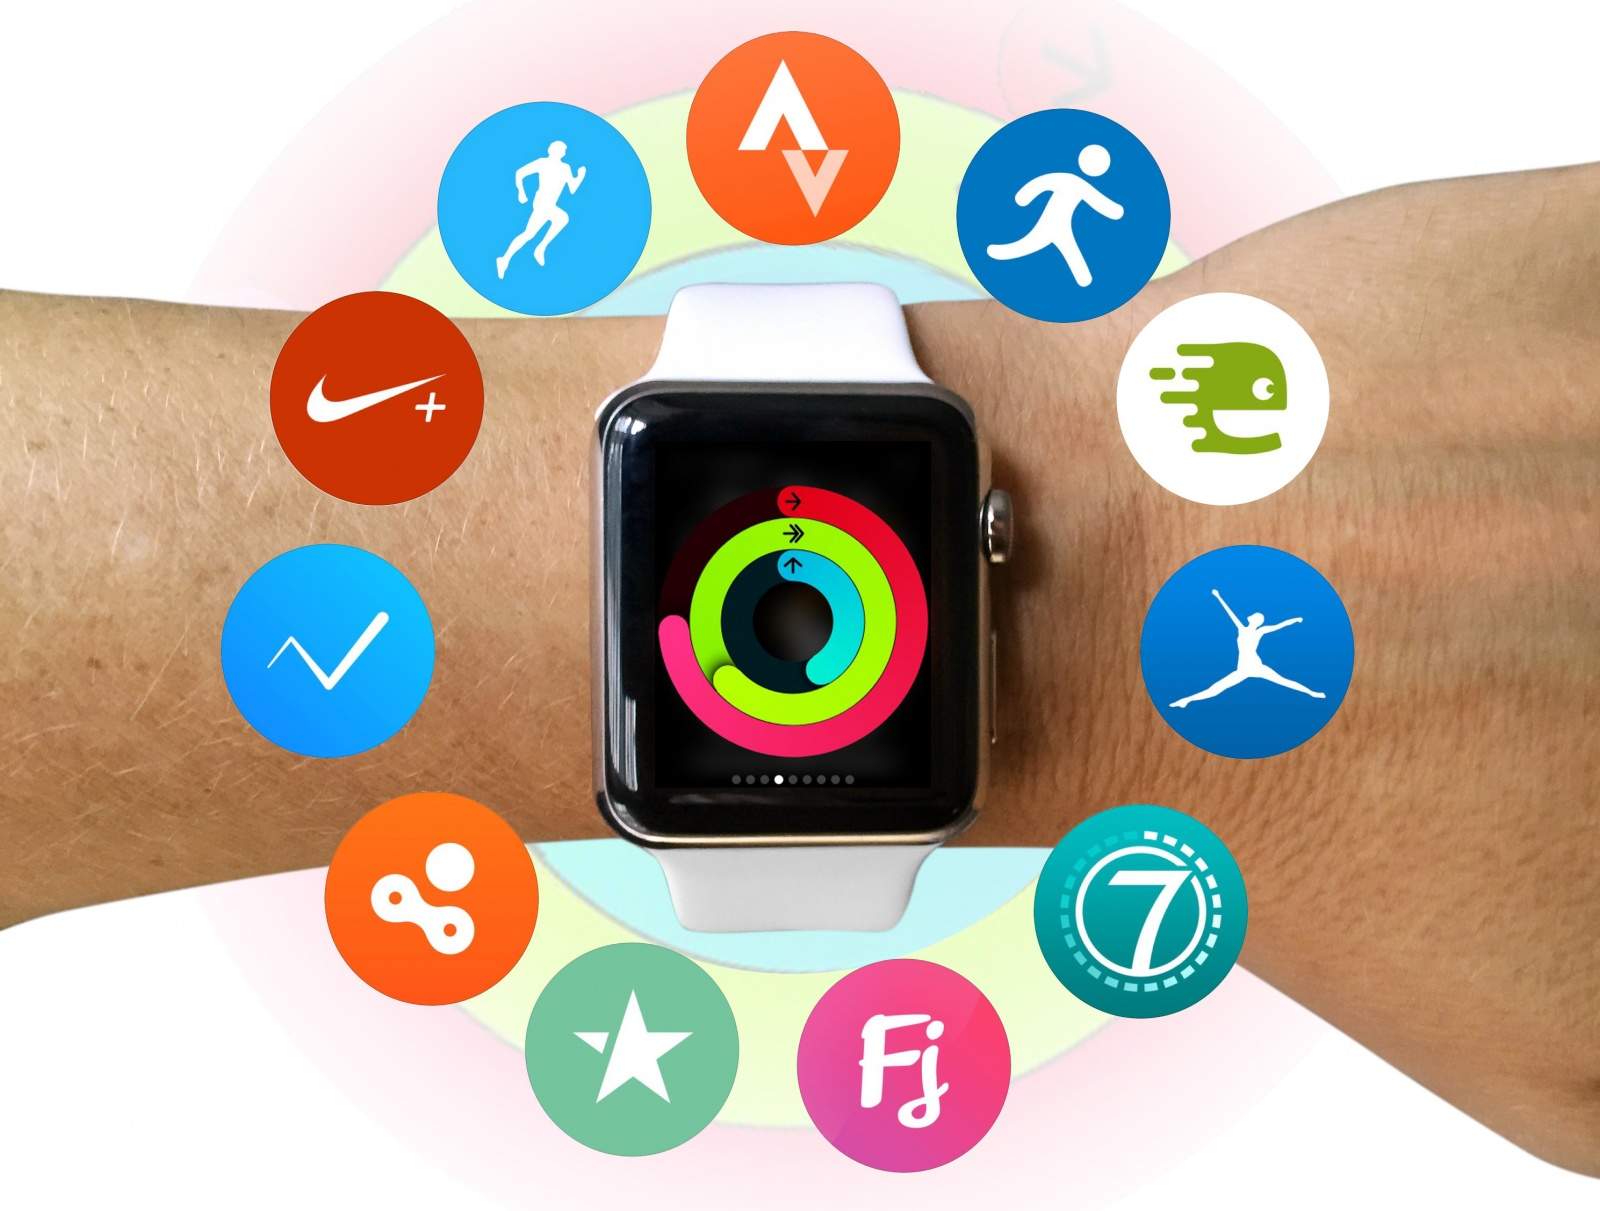 The Activity app forms the hub of Apple’s fitness platform strategy.